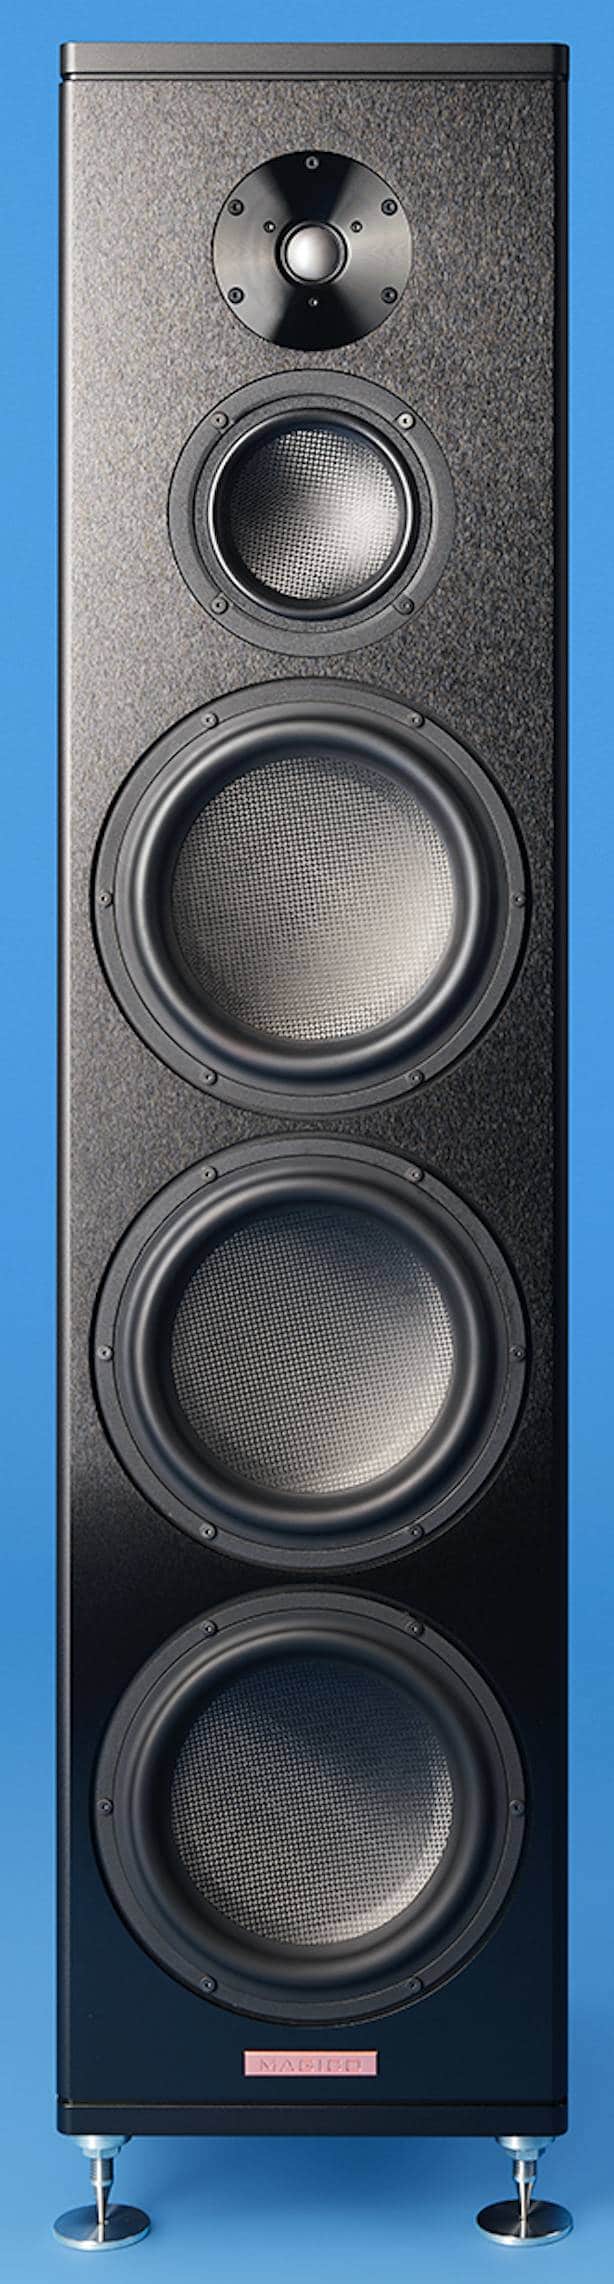 A5 Speaker From Magico